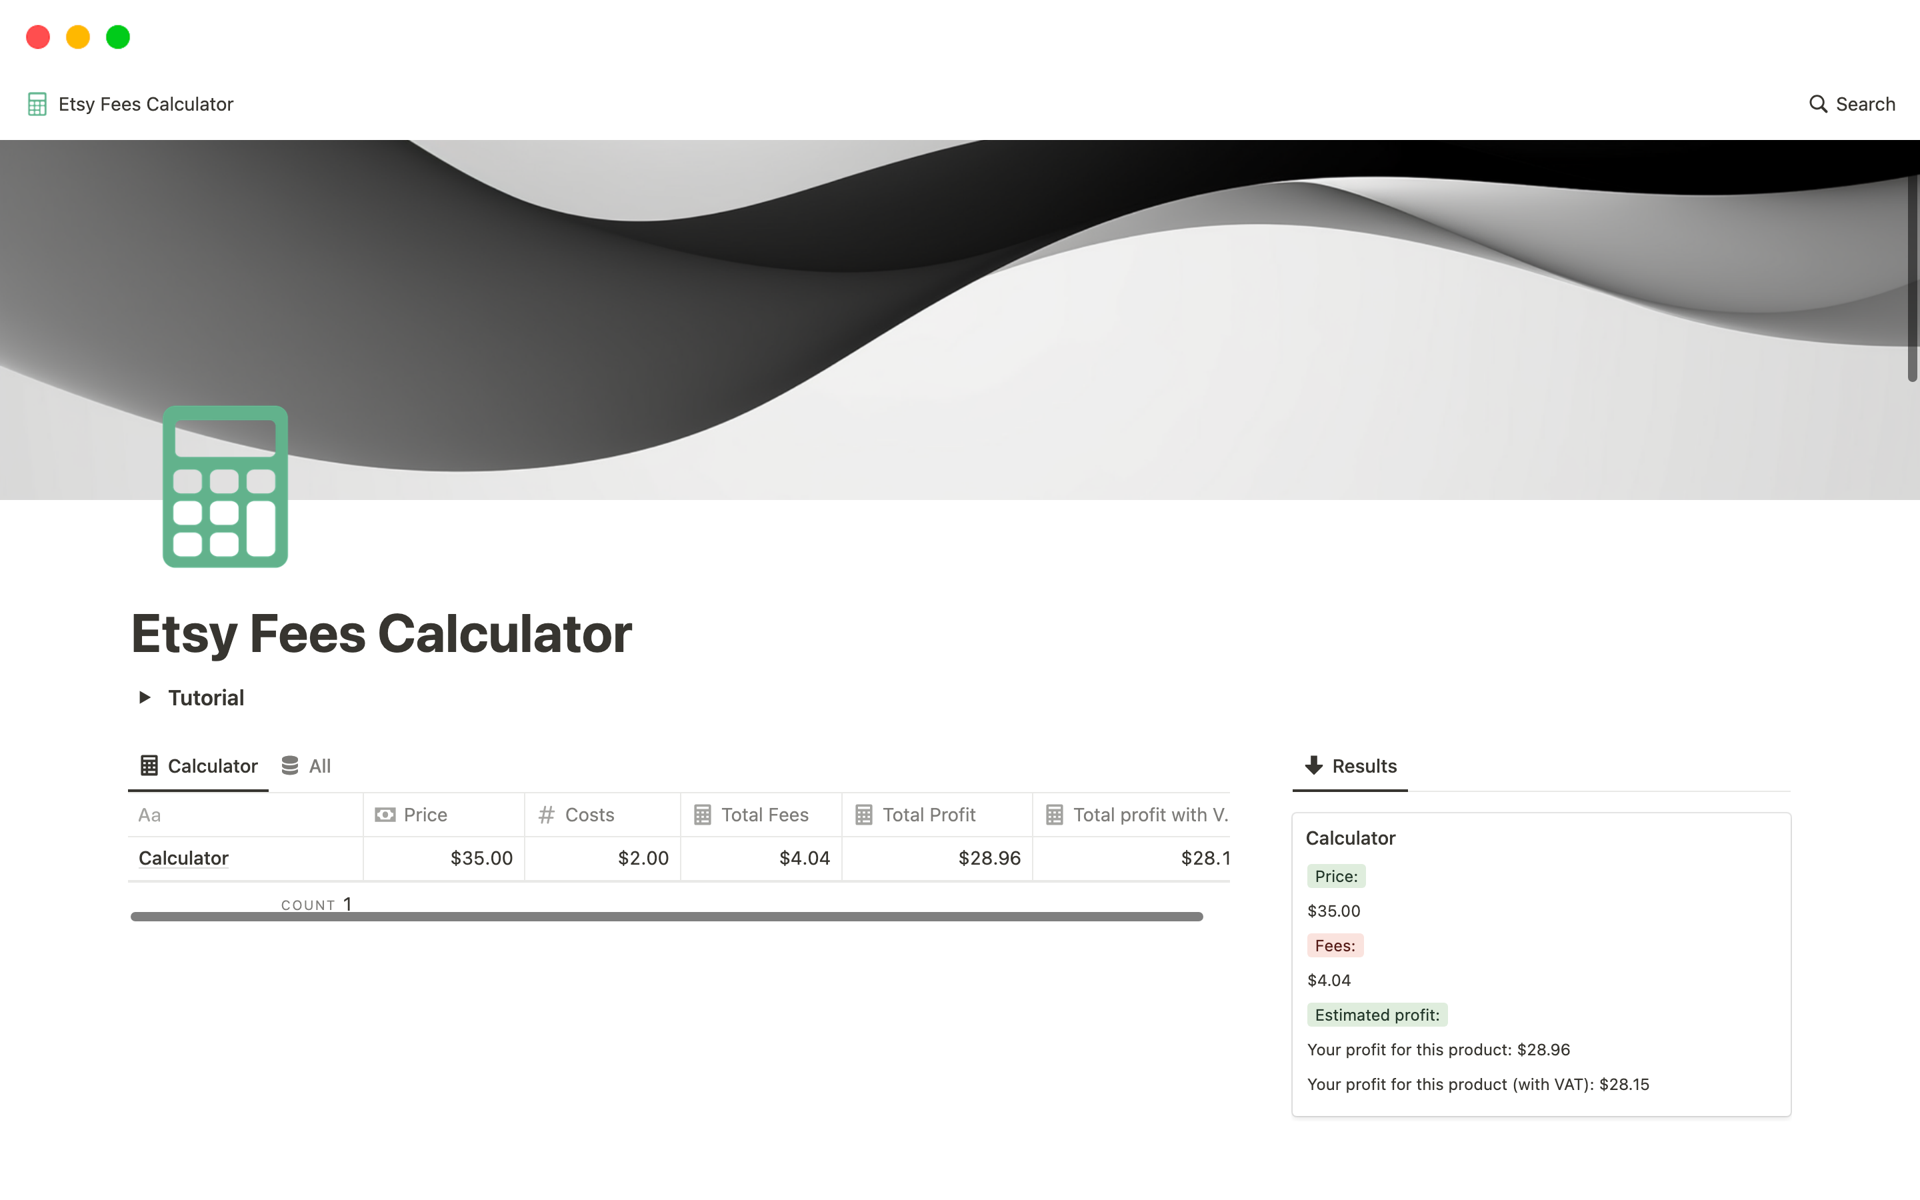 With its automated features, the Etsy fees calculator will help you to find the right pricing and automatically calculate your potential profit.